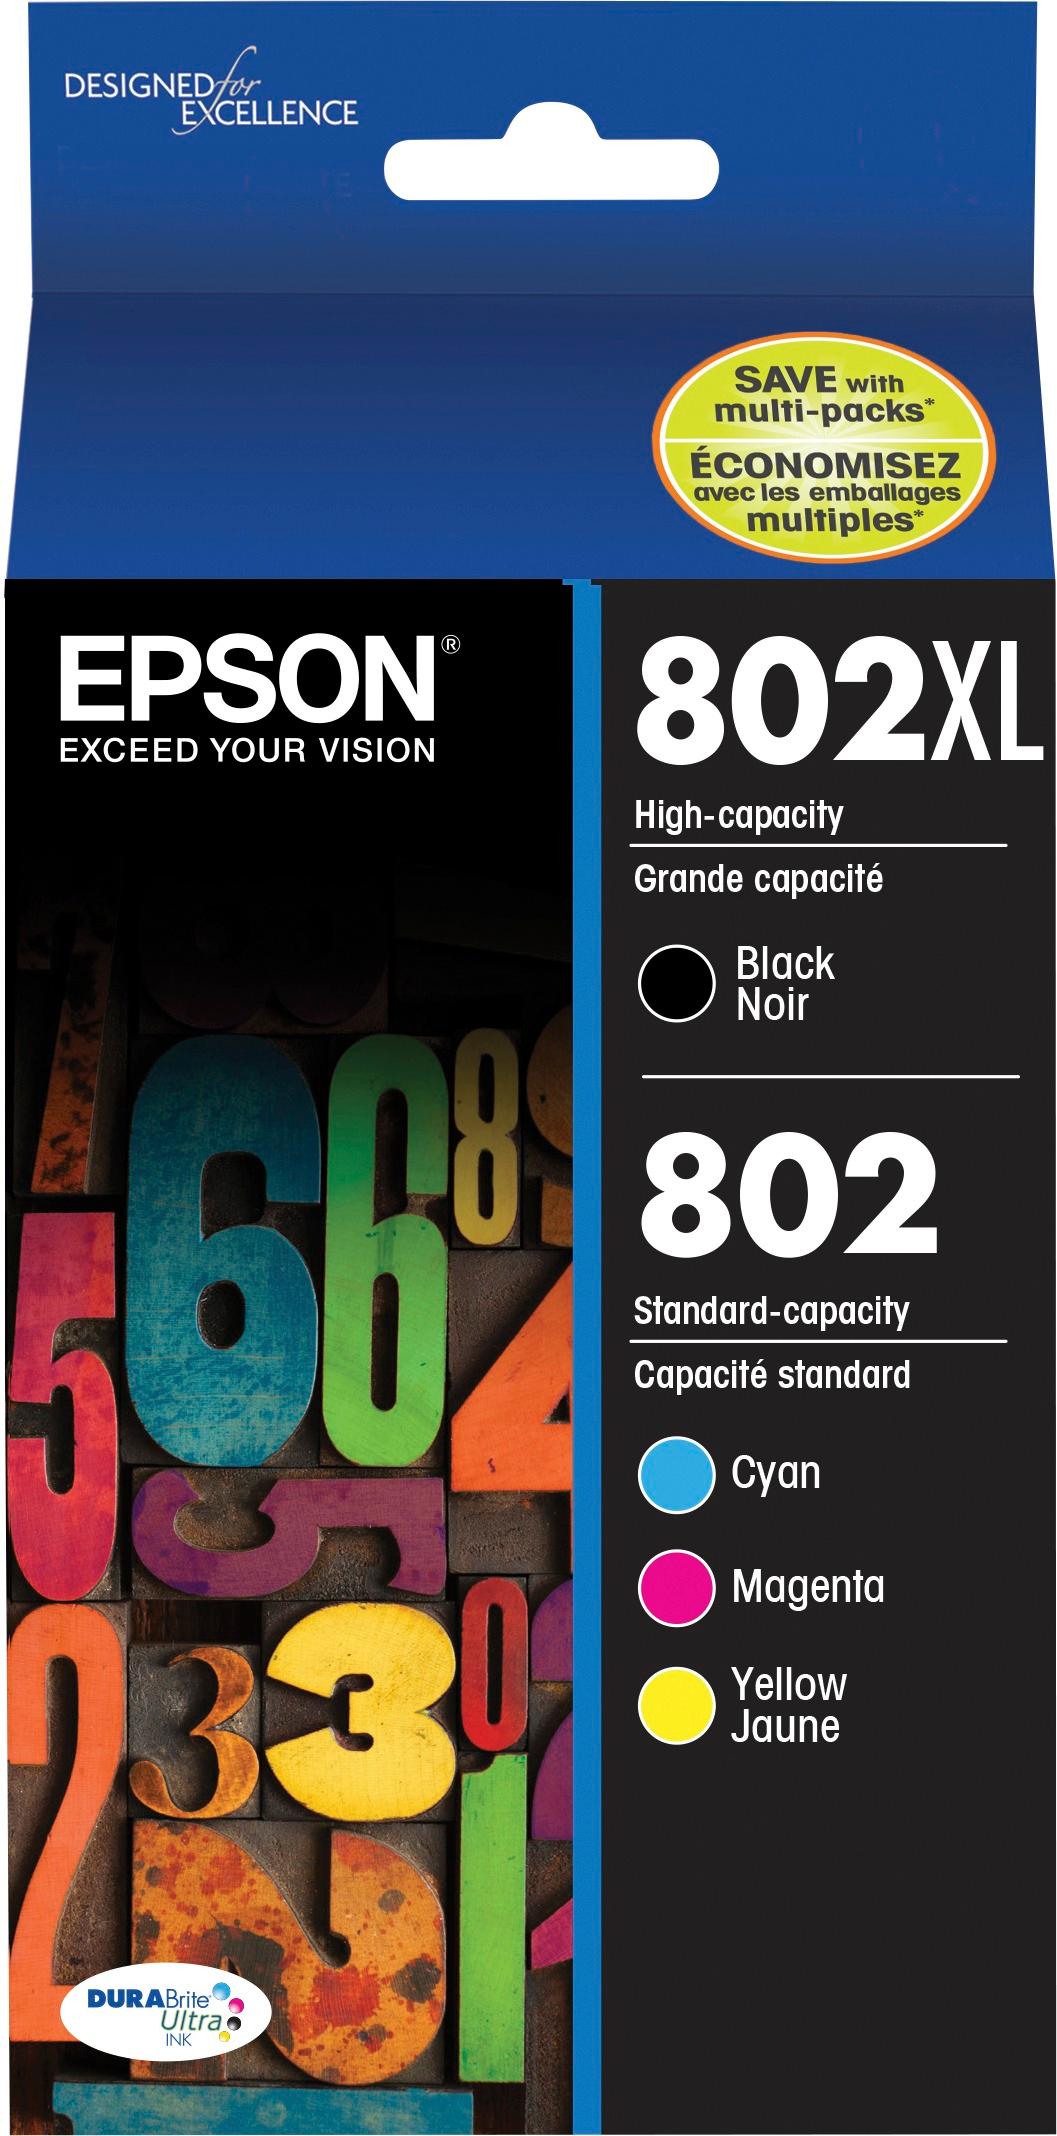 Epson 302XL Black & Color Ink Cartridge Set, High Yield, 5 Pack